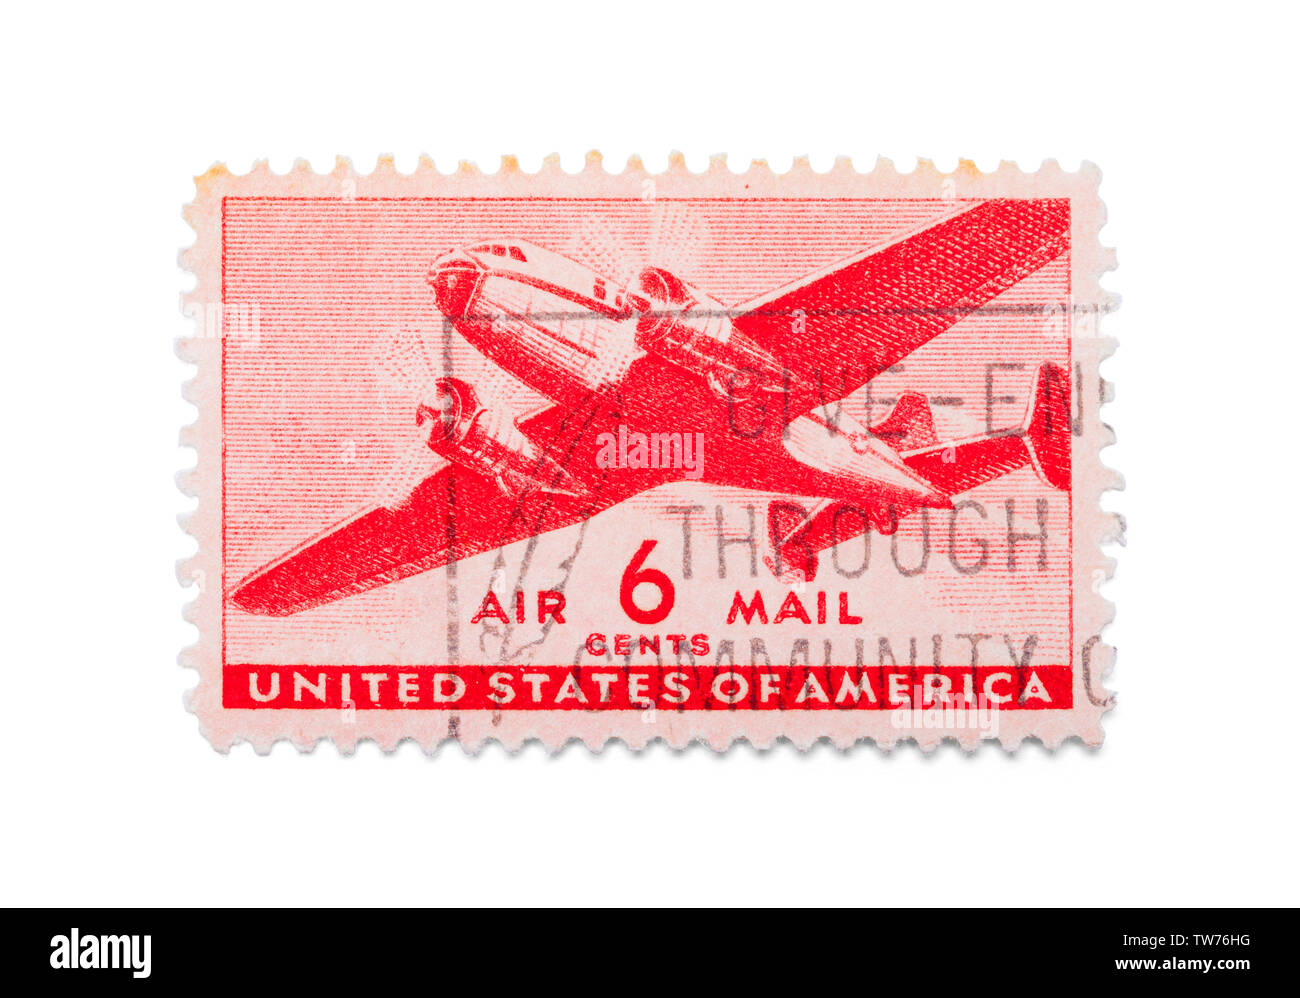 USA Retro Air Mail Postage Stamp Isolated on White Background. Stock Photo